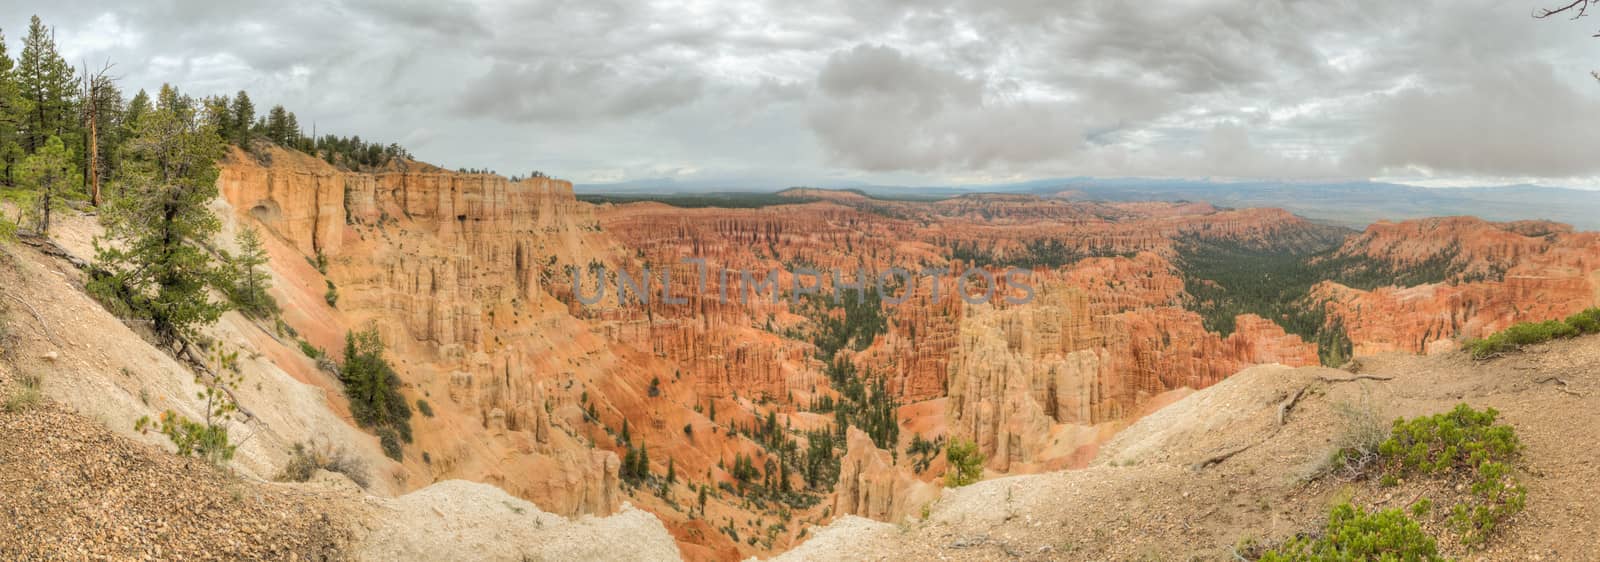 Canyon Bryce amphitheater panorama by weltreisendertj